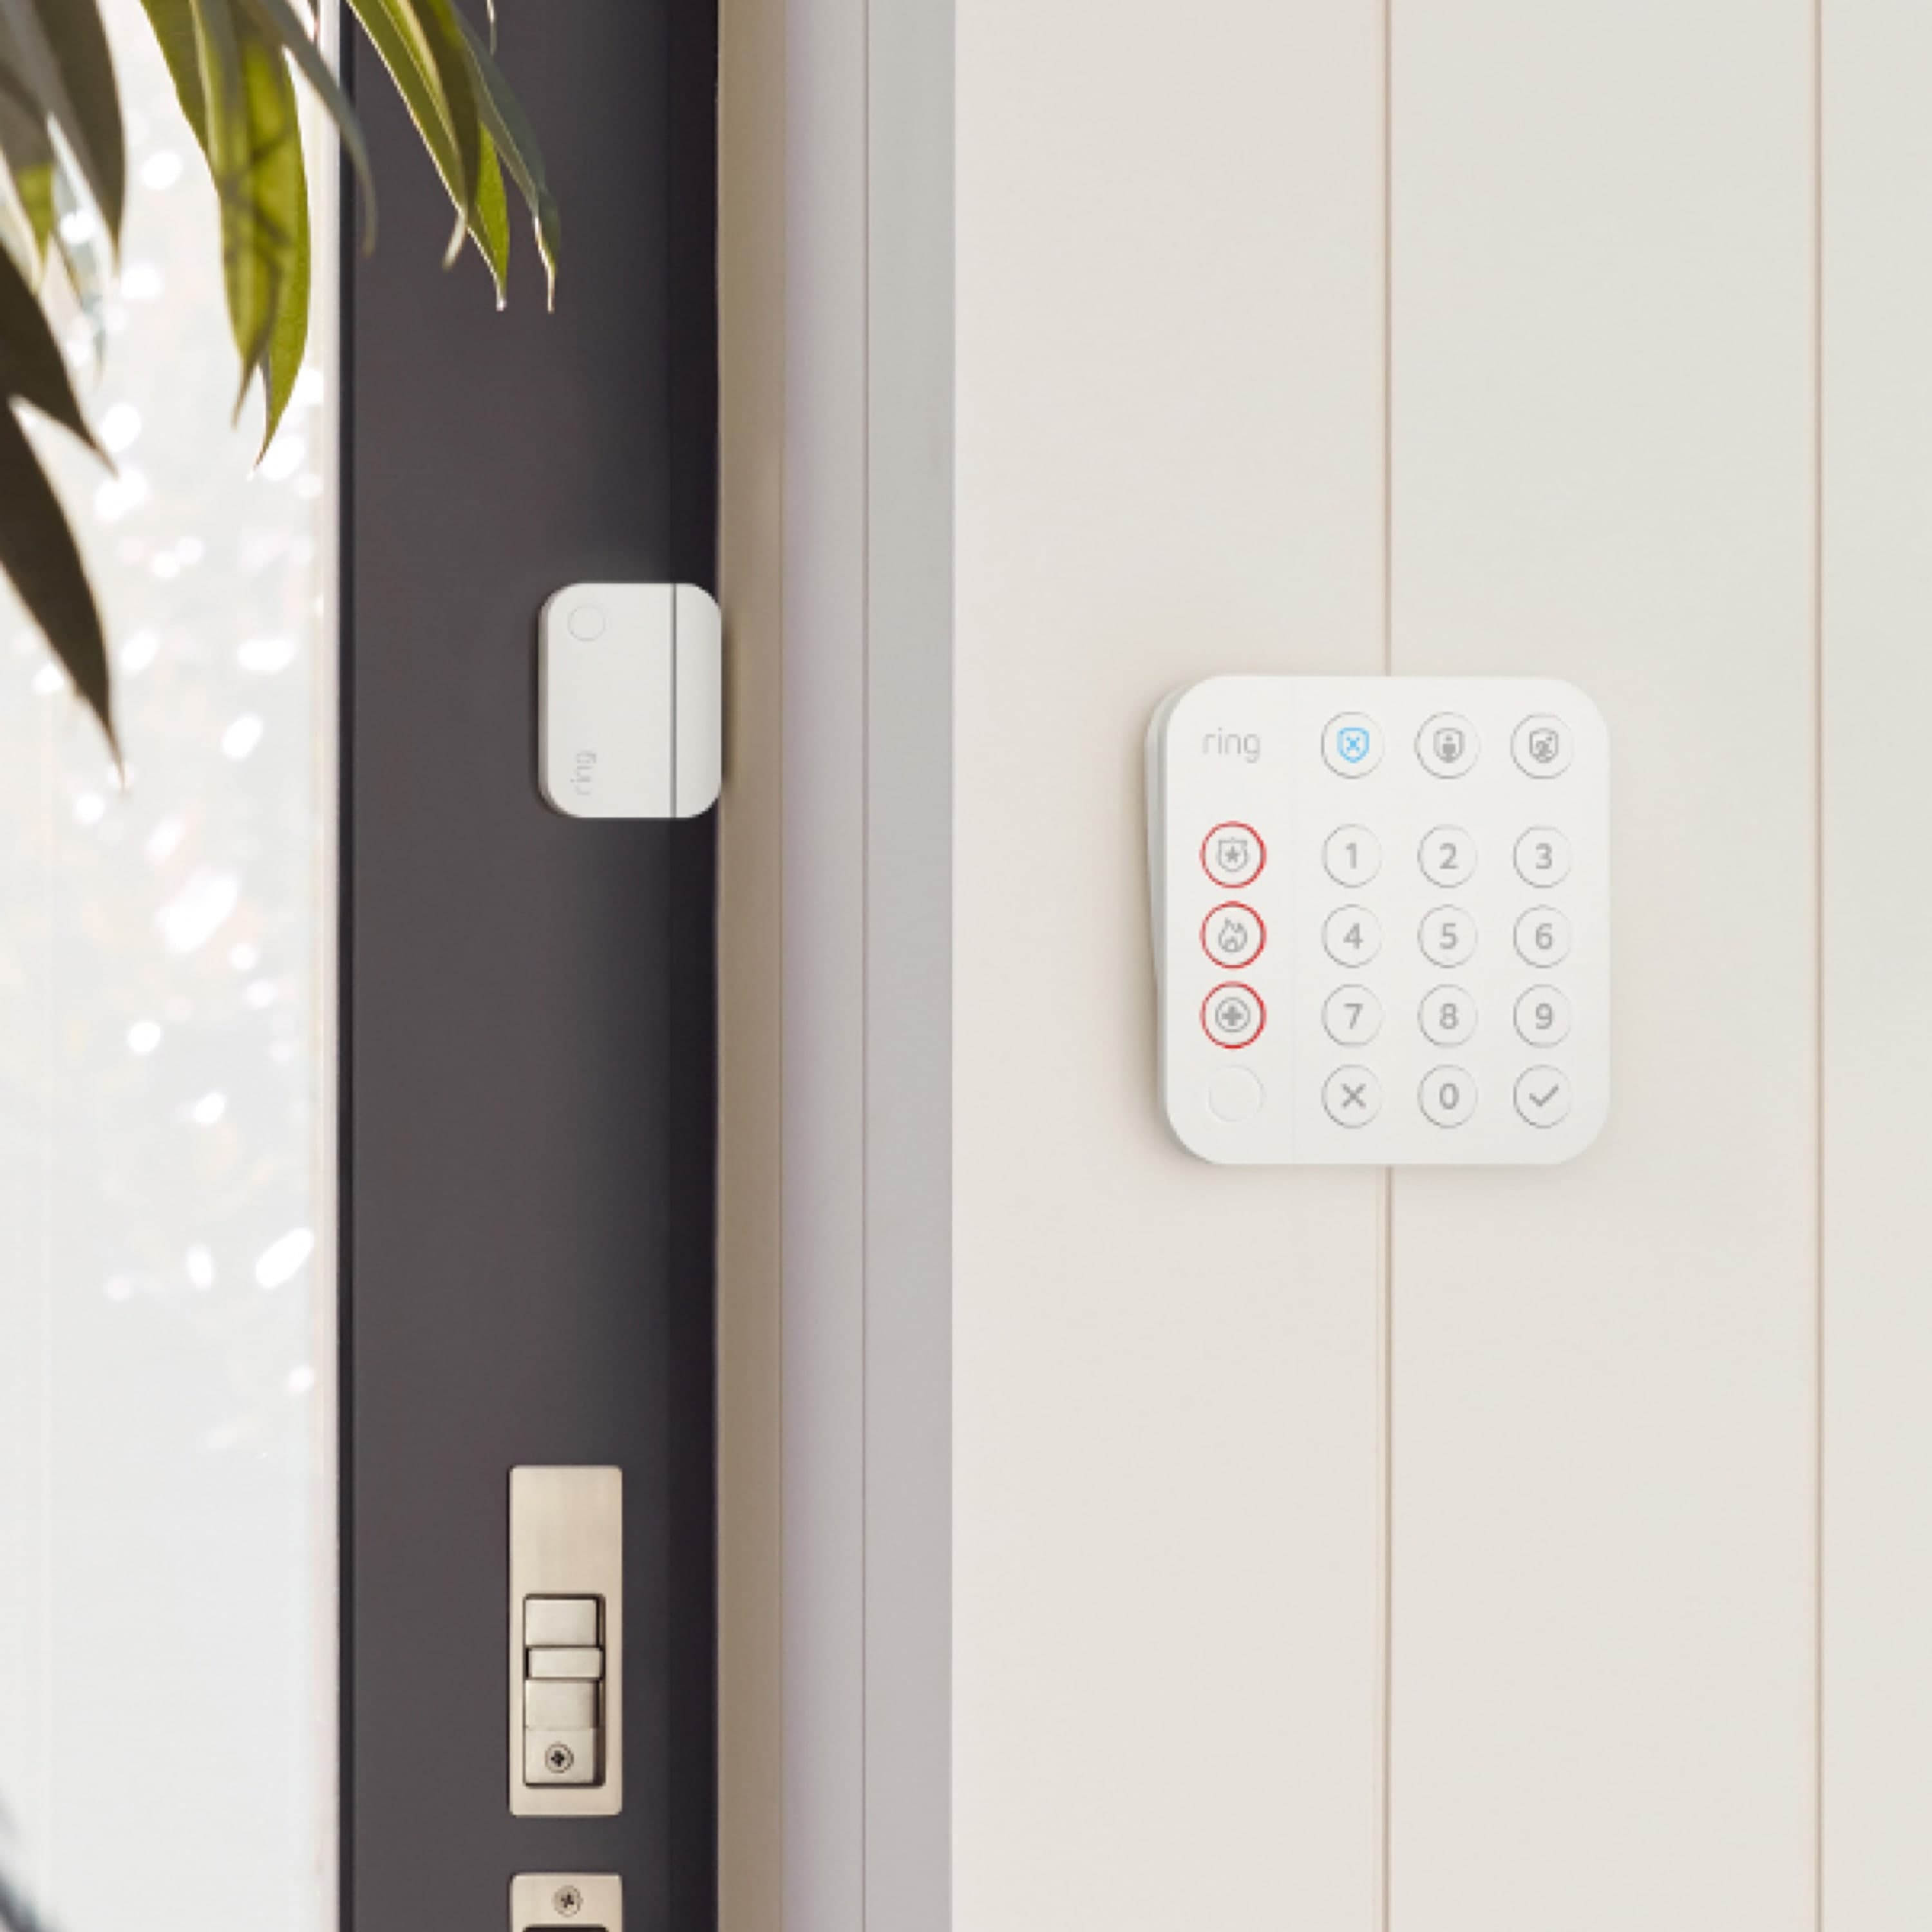 Alarm Pro Security Kit, 8-Piece + Stick Up Cam Battery + Echo Show 5 - Inside front door, a Ring Alarm Keypad is mounted on the wall and Contact Sensor on the door.